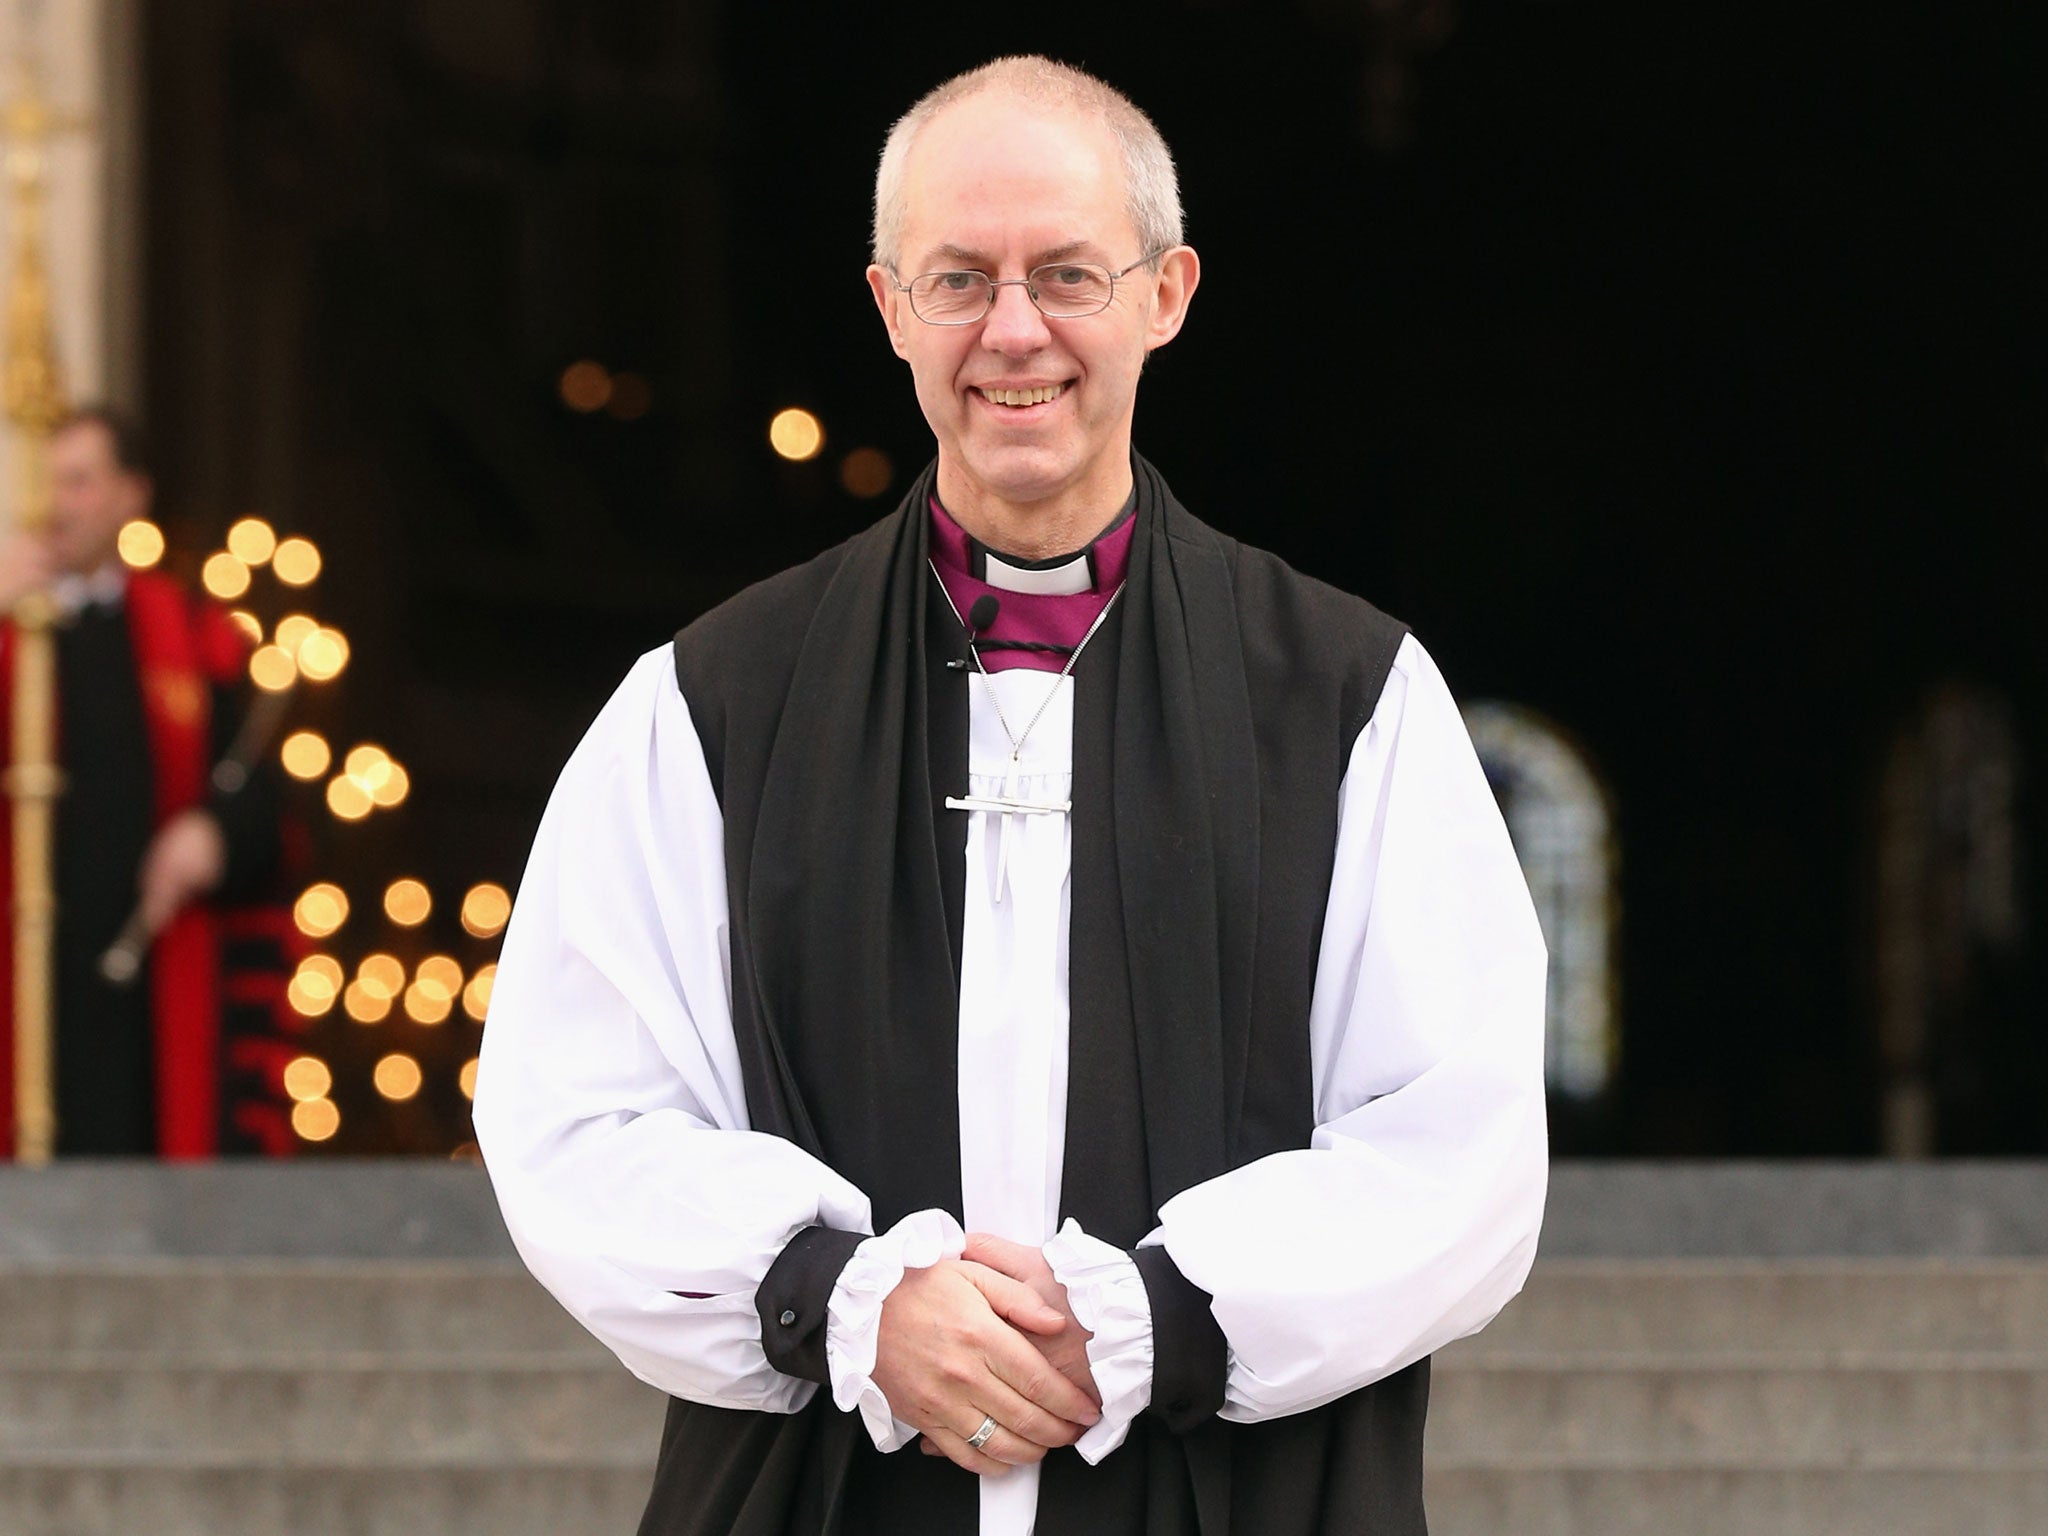 Welby had success in business before training for the priesthood